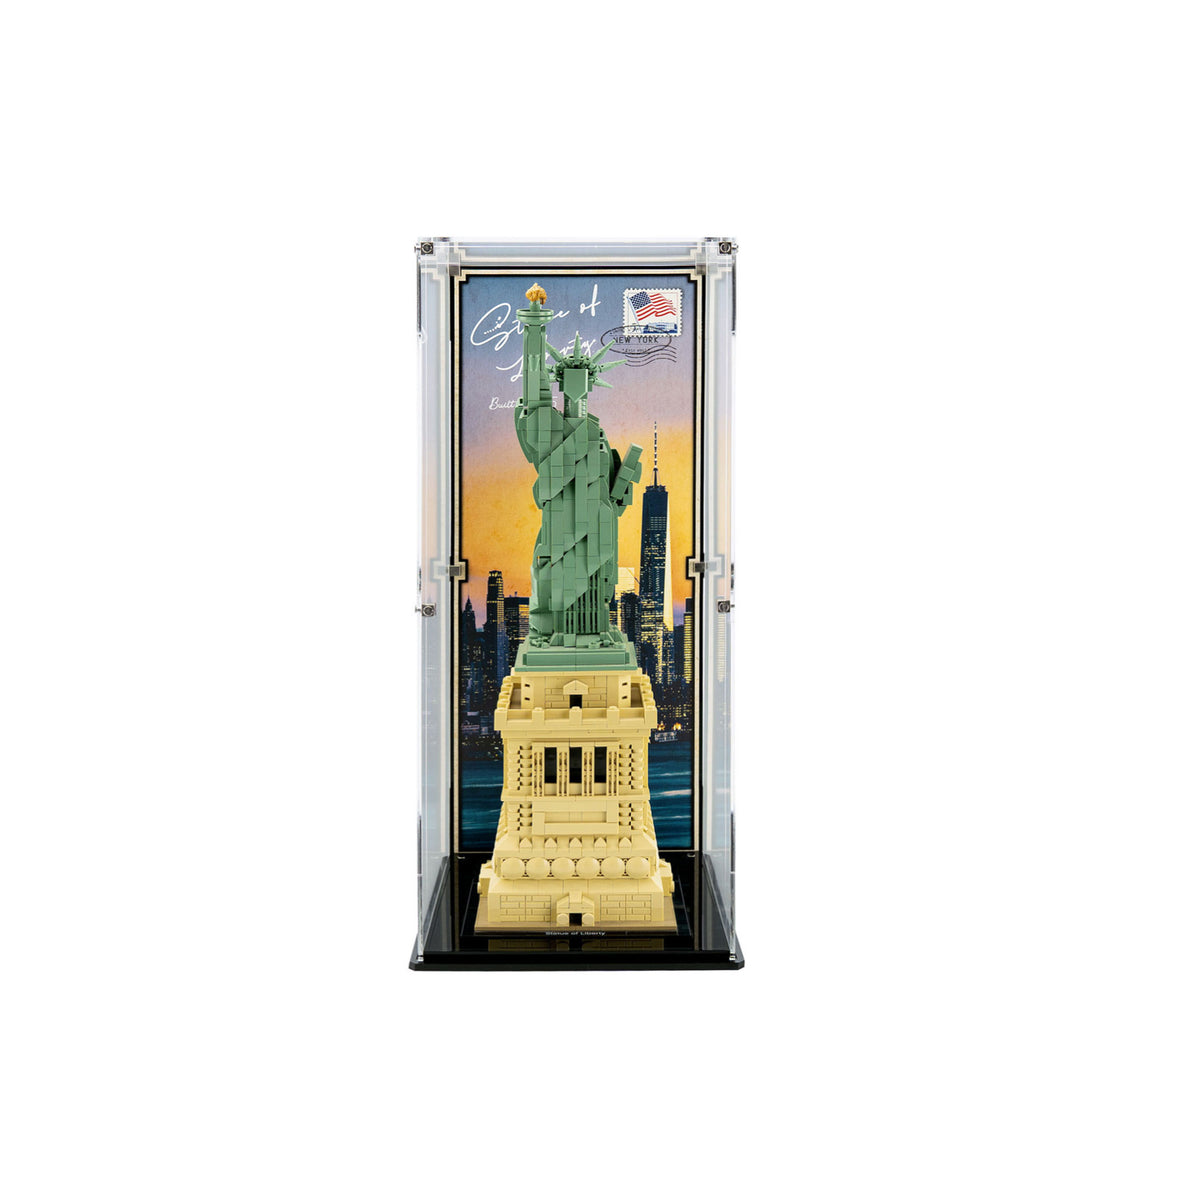 LEGO Architecture Statue of Liberty 21042 Model Building Set - Collectible  New York City Souvenir, Creative Home Décor or Office Centerpiece, Great  Gift Idea for Adults and Teens 